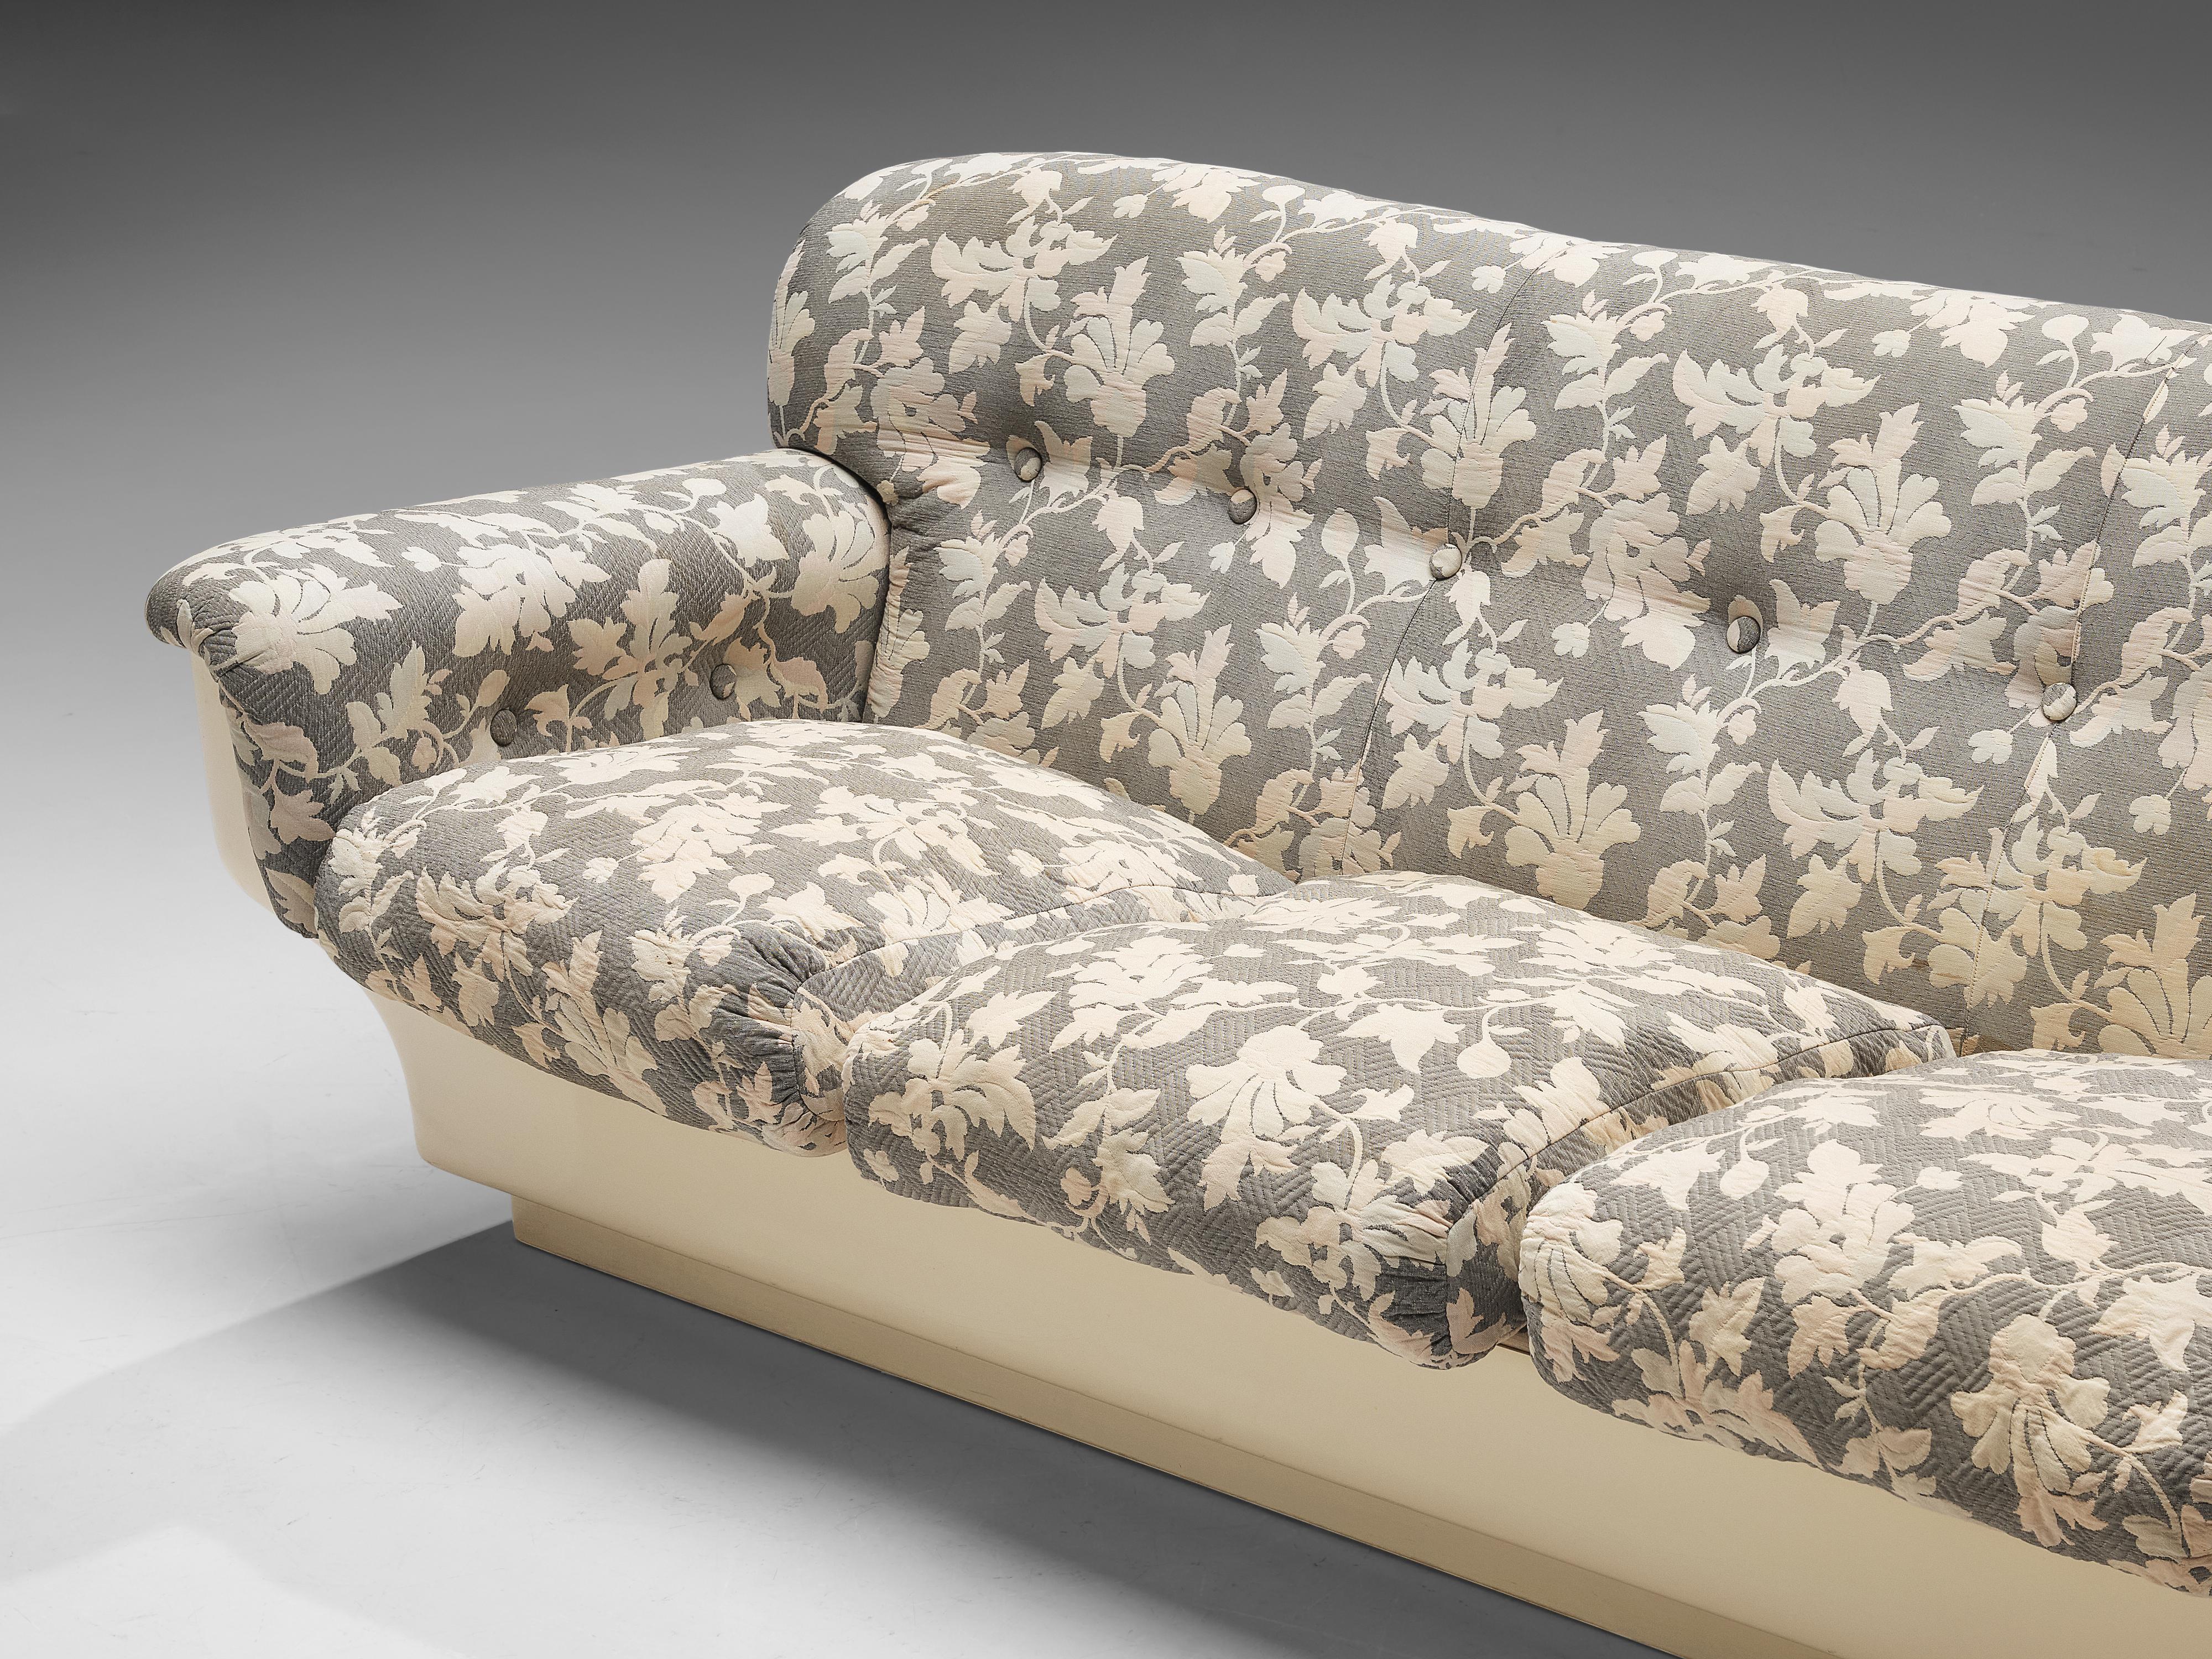 Studio Tecnico for Mobilquattro ‘Delta 699’ Sofa in Floral Upholstery In Good Condition For Sale In Waalwijk, NL